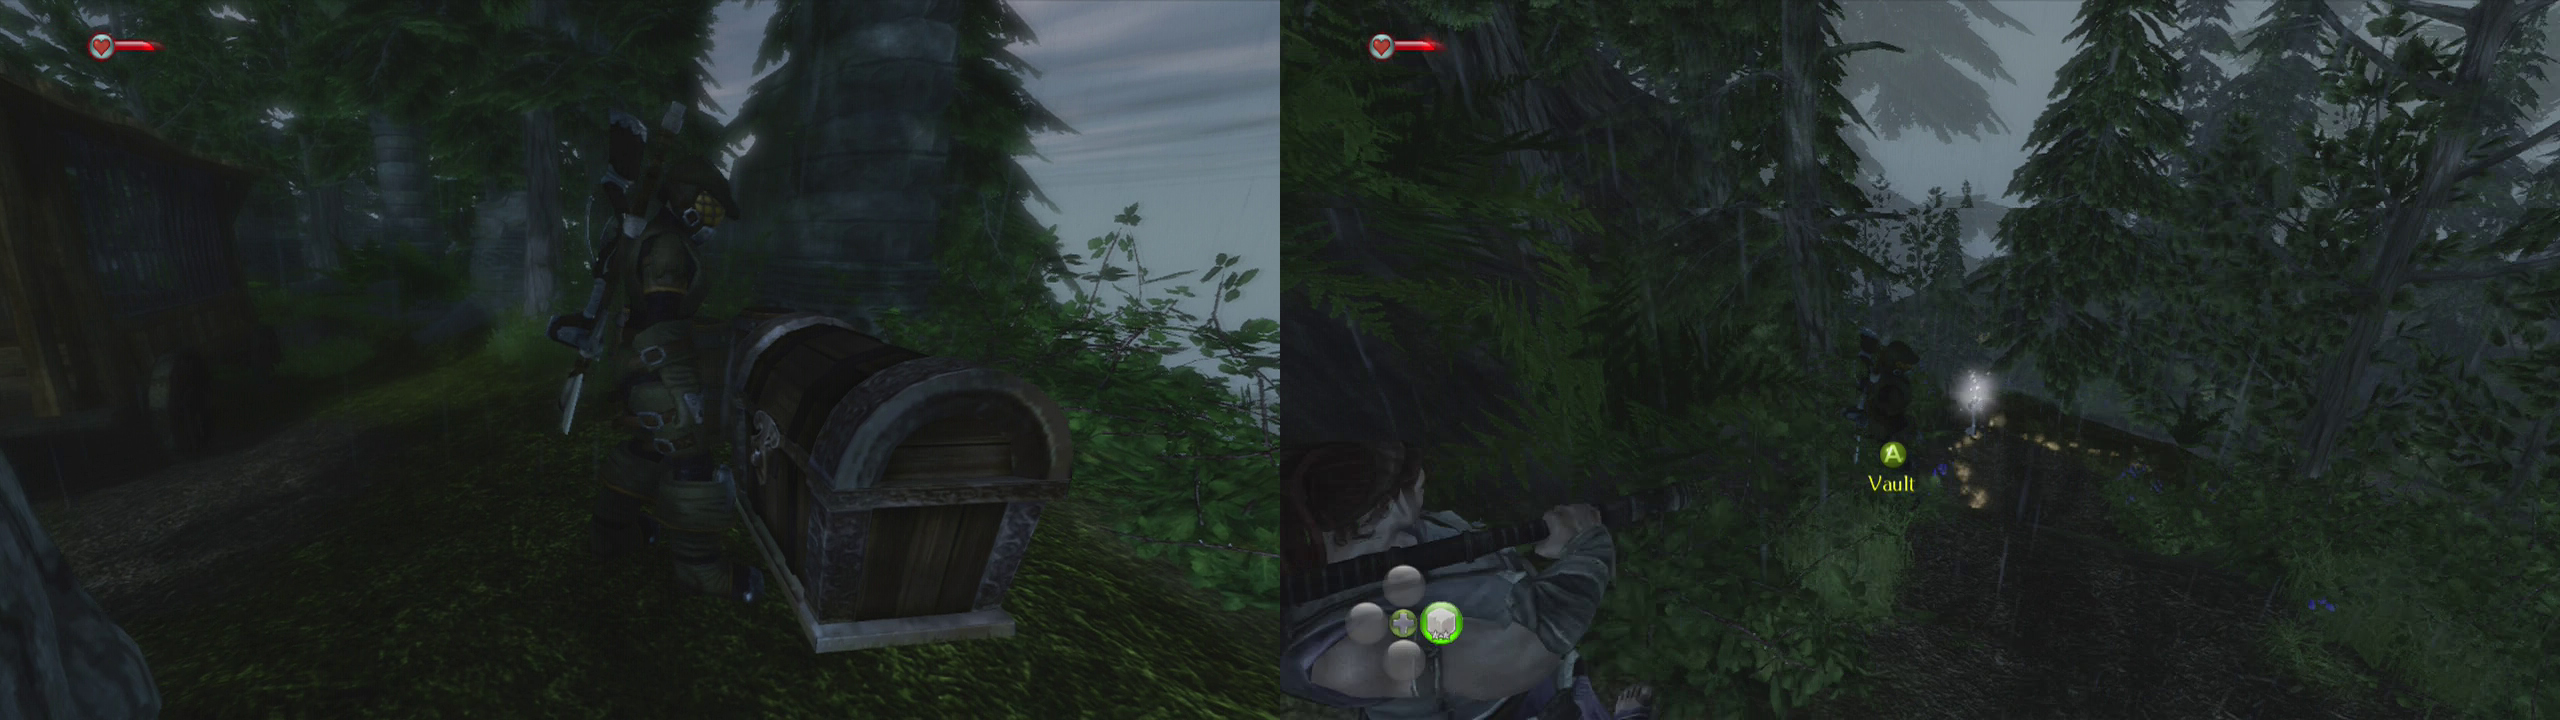 Keep an eye out for chests (left) as you move through this area and be sure to grab the silver key from a lower ledge to the left of the main path (right).